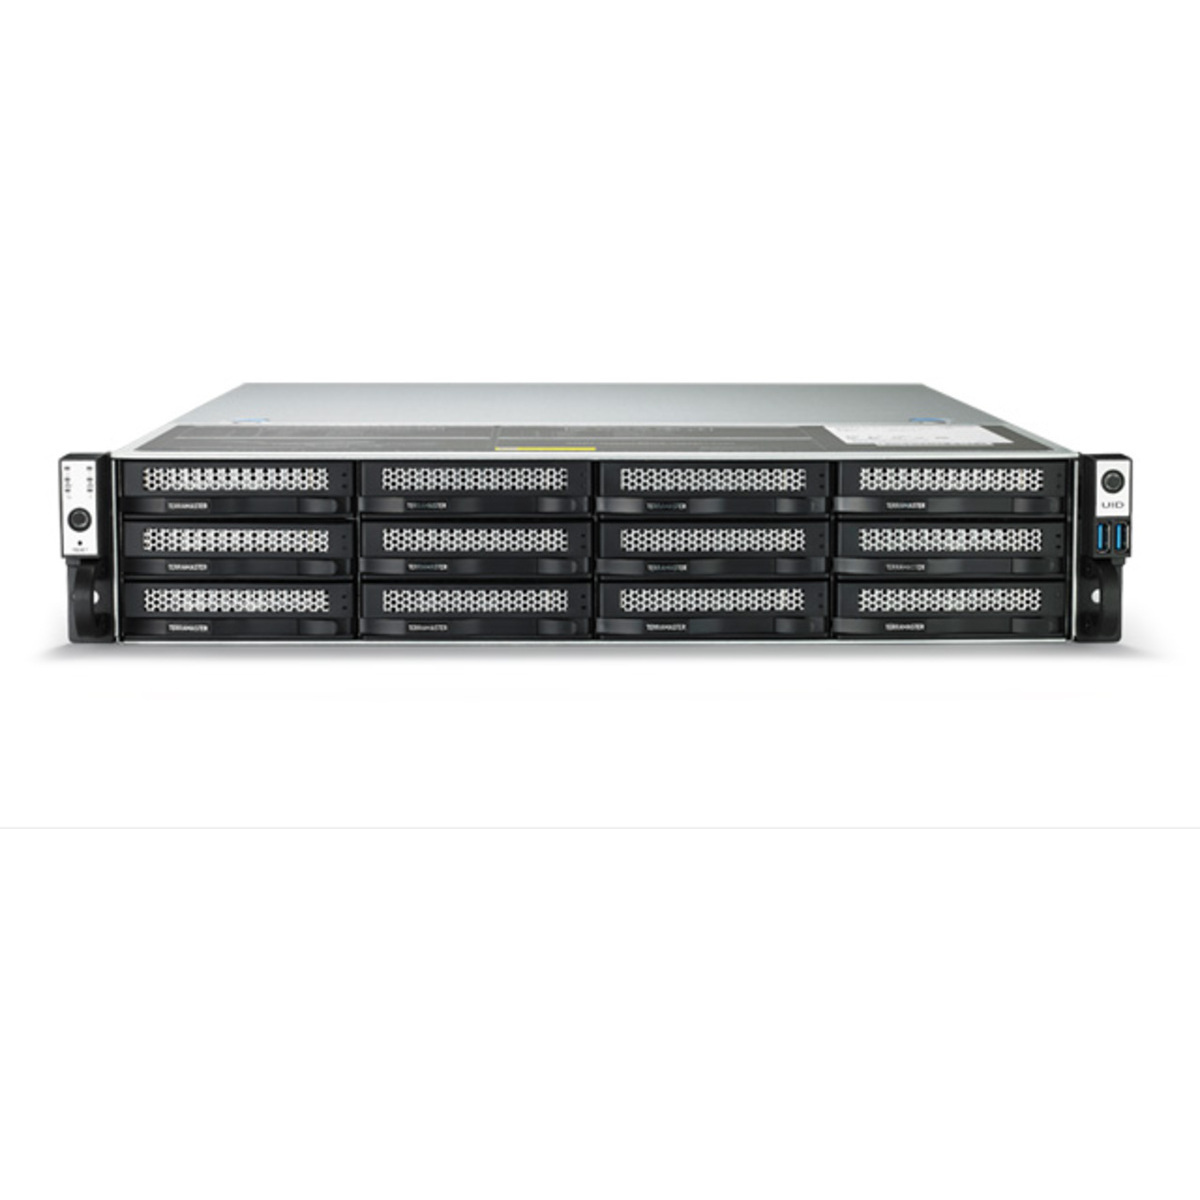 TerraMaster U12-722-2224 4tb 12-Bay RackMount Large Business / Enterprise NAS - Network Attached Storage Device 8x500gb Crucial MX500 CT500MX500SSD1 2.5 560/510MB/s SATA 6Gb/s SSD CONSUMER Class Drives Installed - Burn-In Tested U12-722-2224